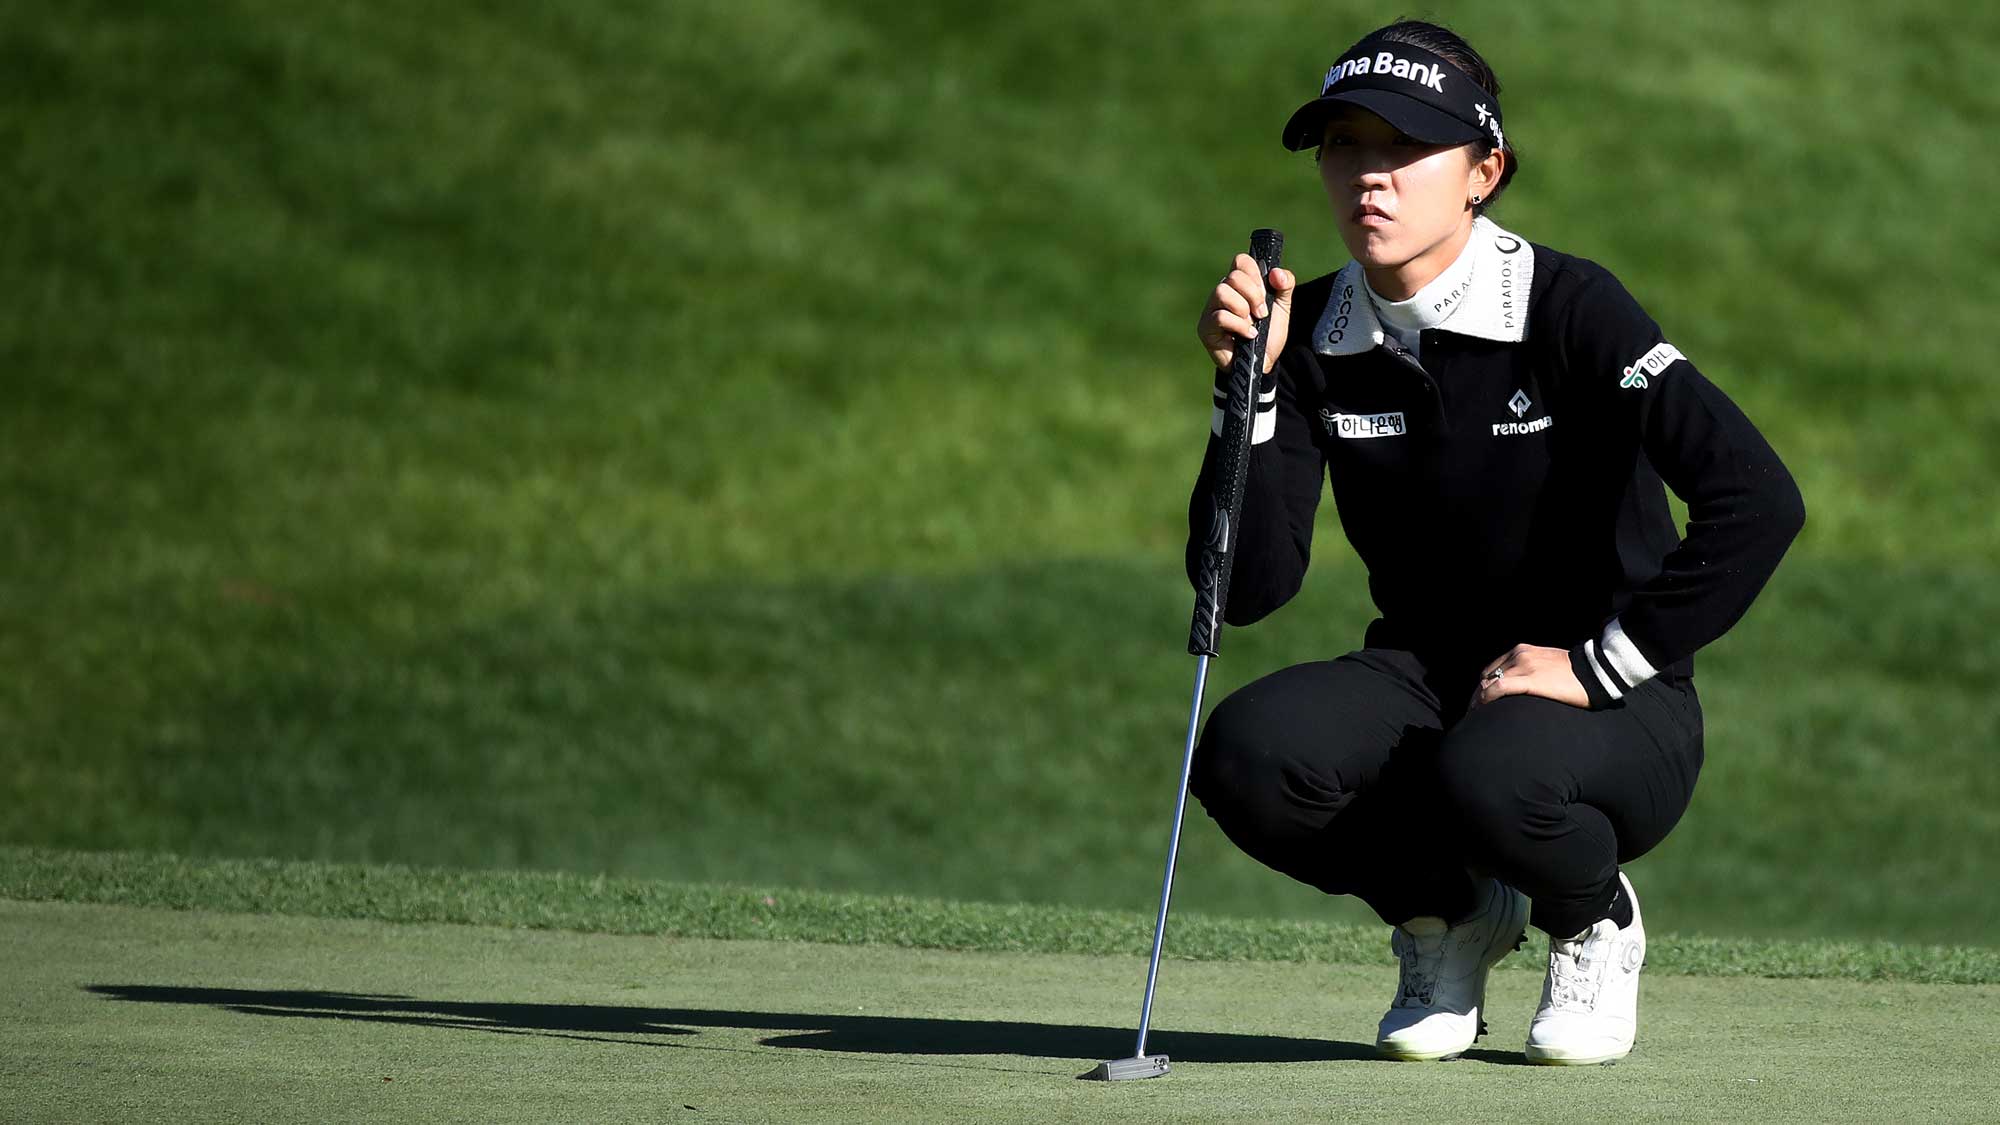 Defending Champion Lydia Ko Lurking With 36 to Play at BMW Ladies